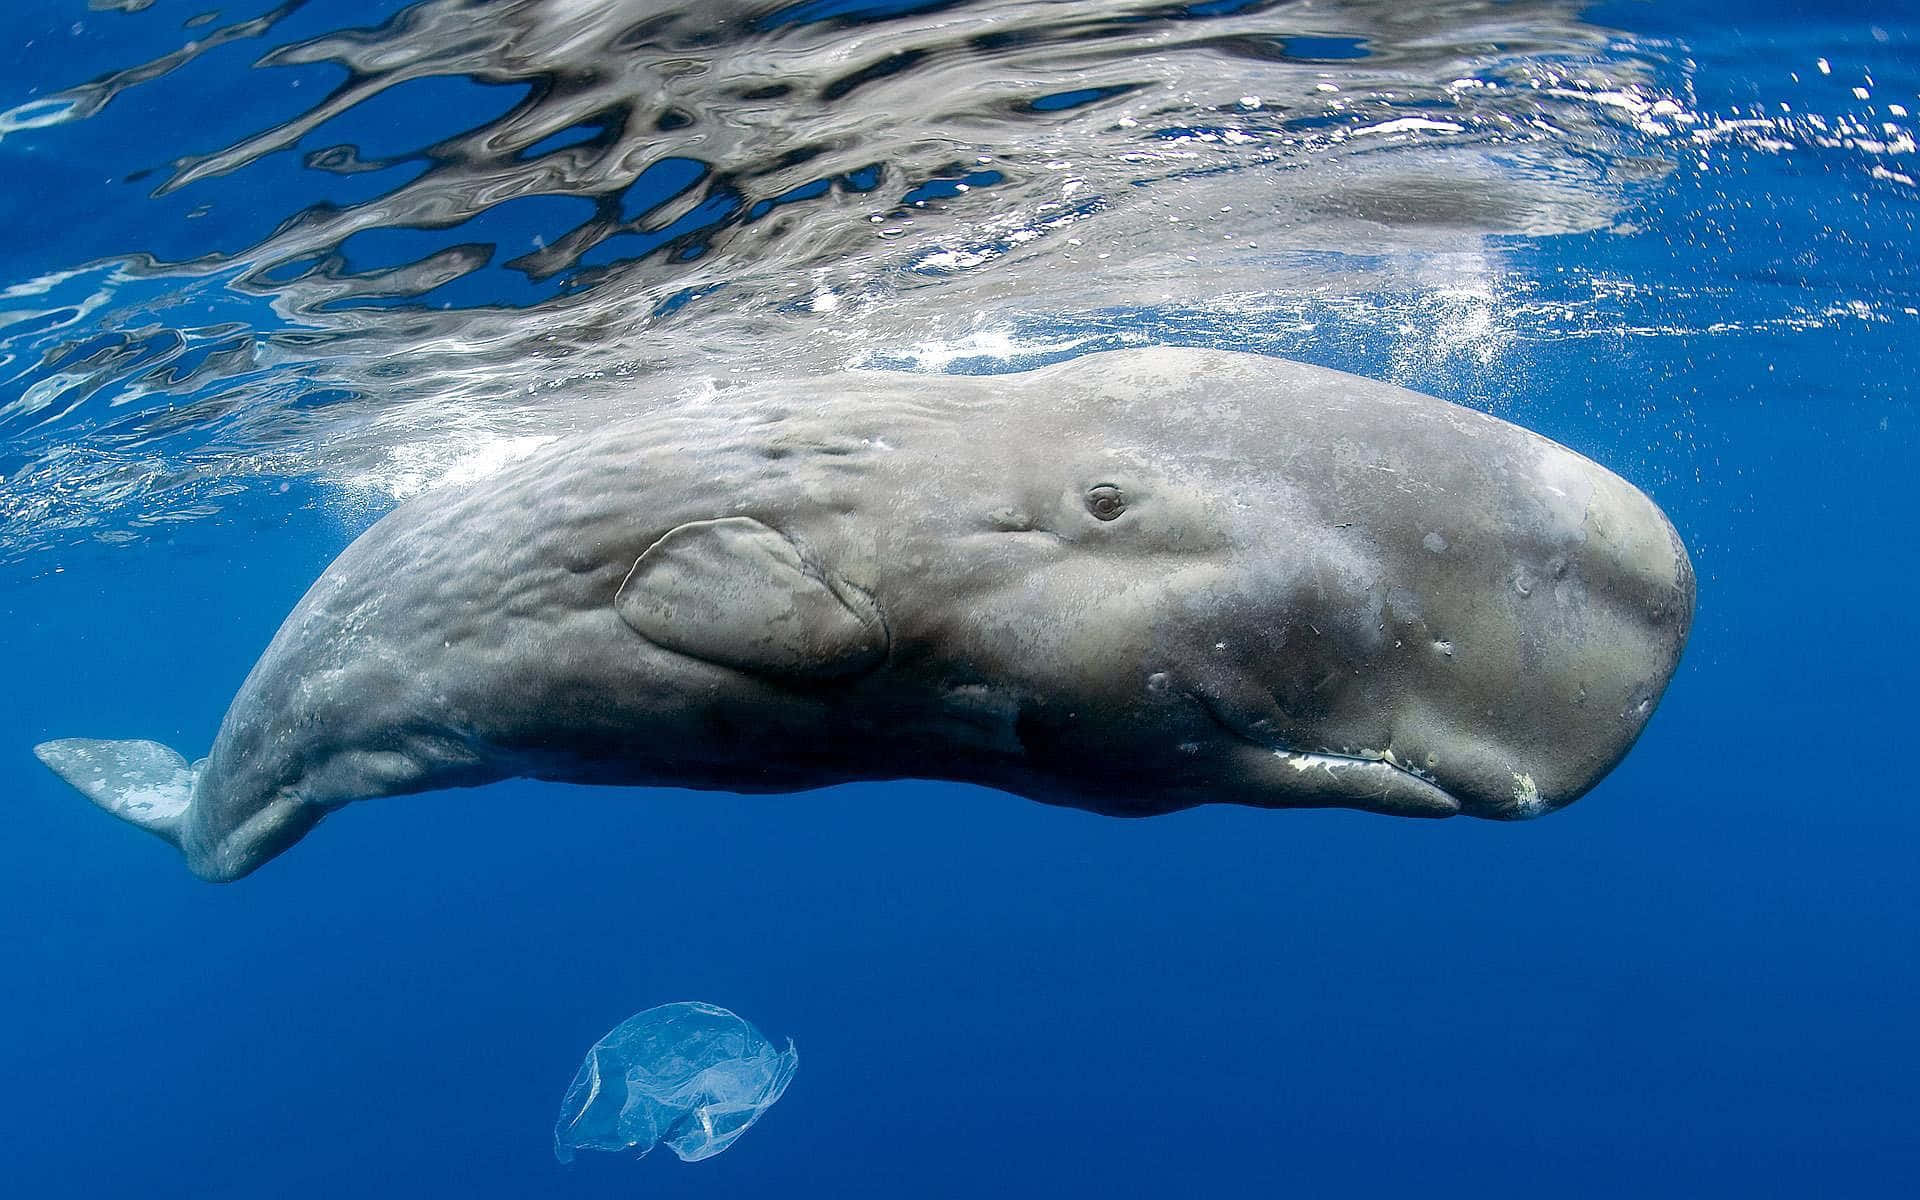 A Sperm Whale Swimming in Crystal Clear Blue Ocean Water